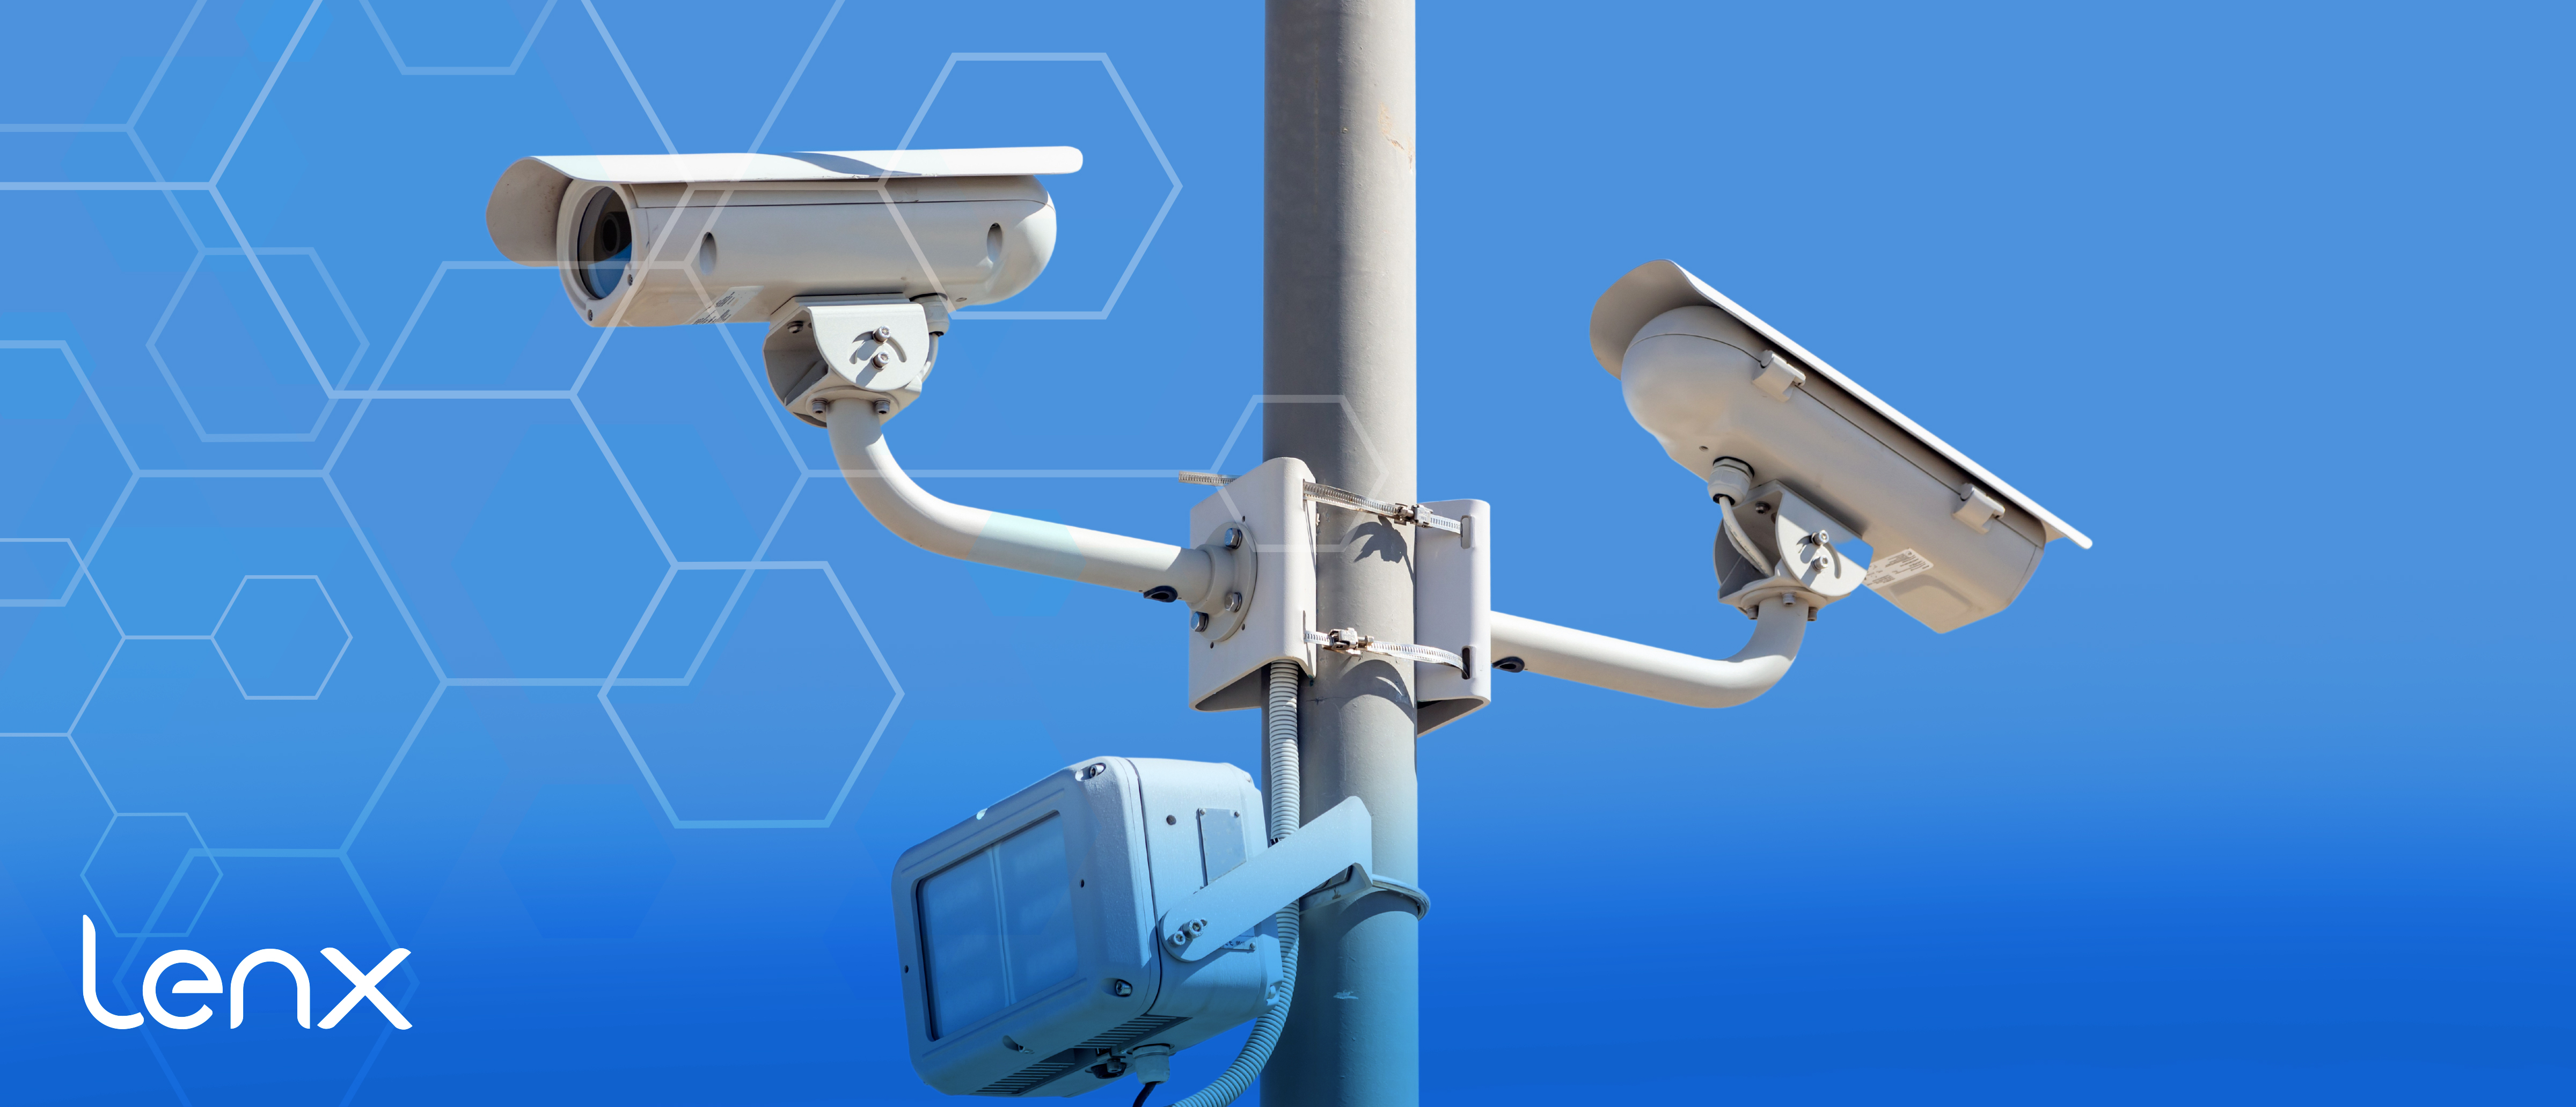 Using AI Security And Active Shooter Detection Systems To Continuously Monitor Cameras